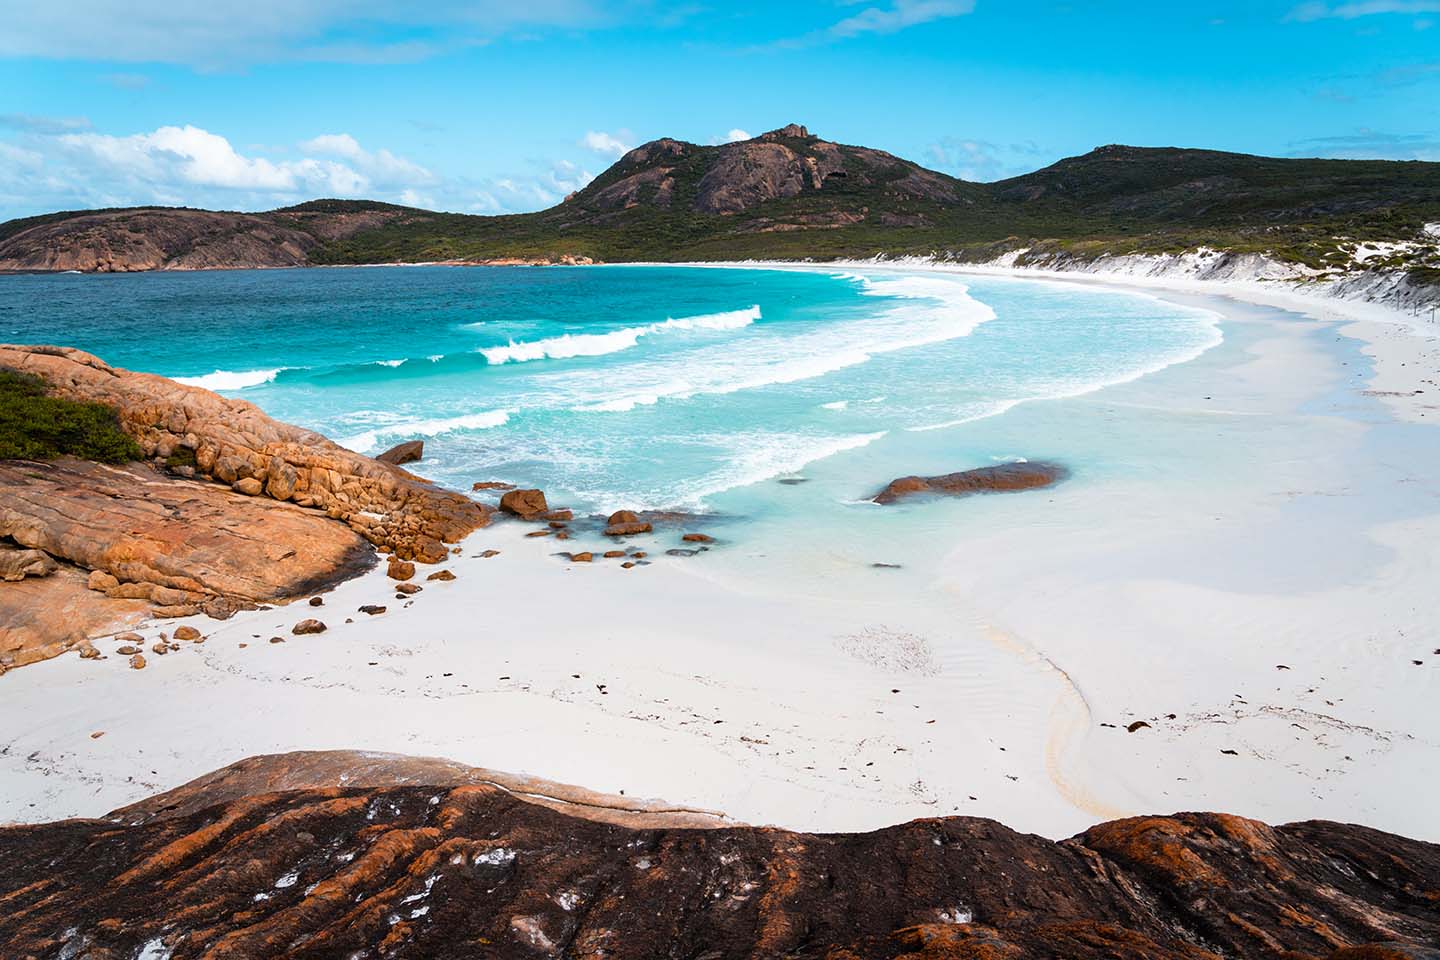 Thistle Cove Beach in Cape Le Grand National Park